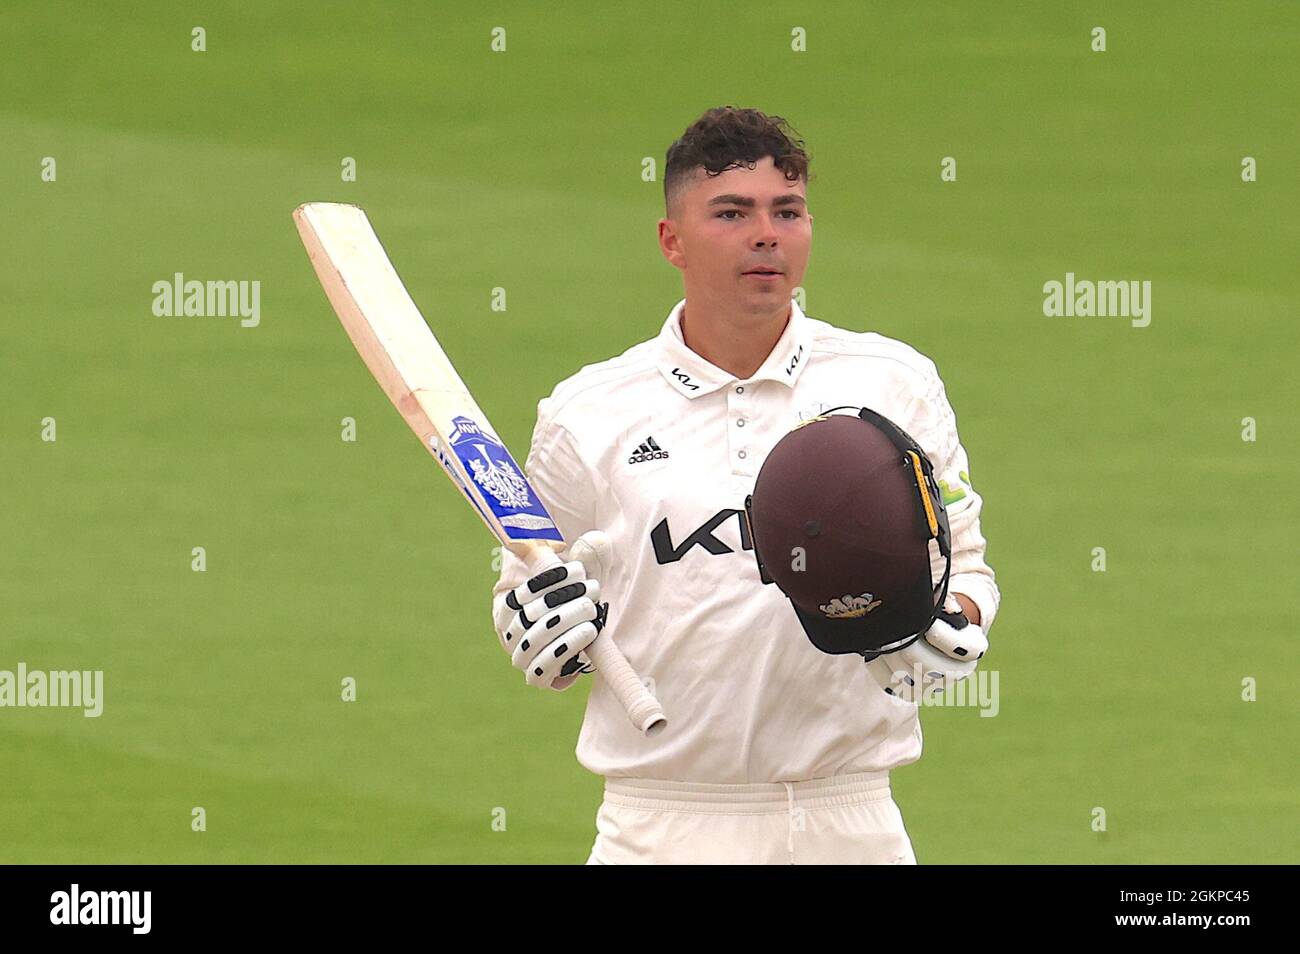 15 September, 2021. London, UK. Surrey’s James Taylor batting as Surrey take on Essex in the County Championship at the Kia Oval, day three David Rowe/Alamy Live News Stock Photo